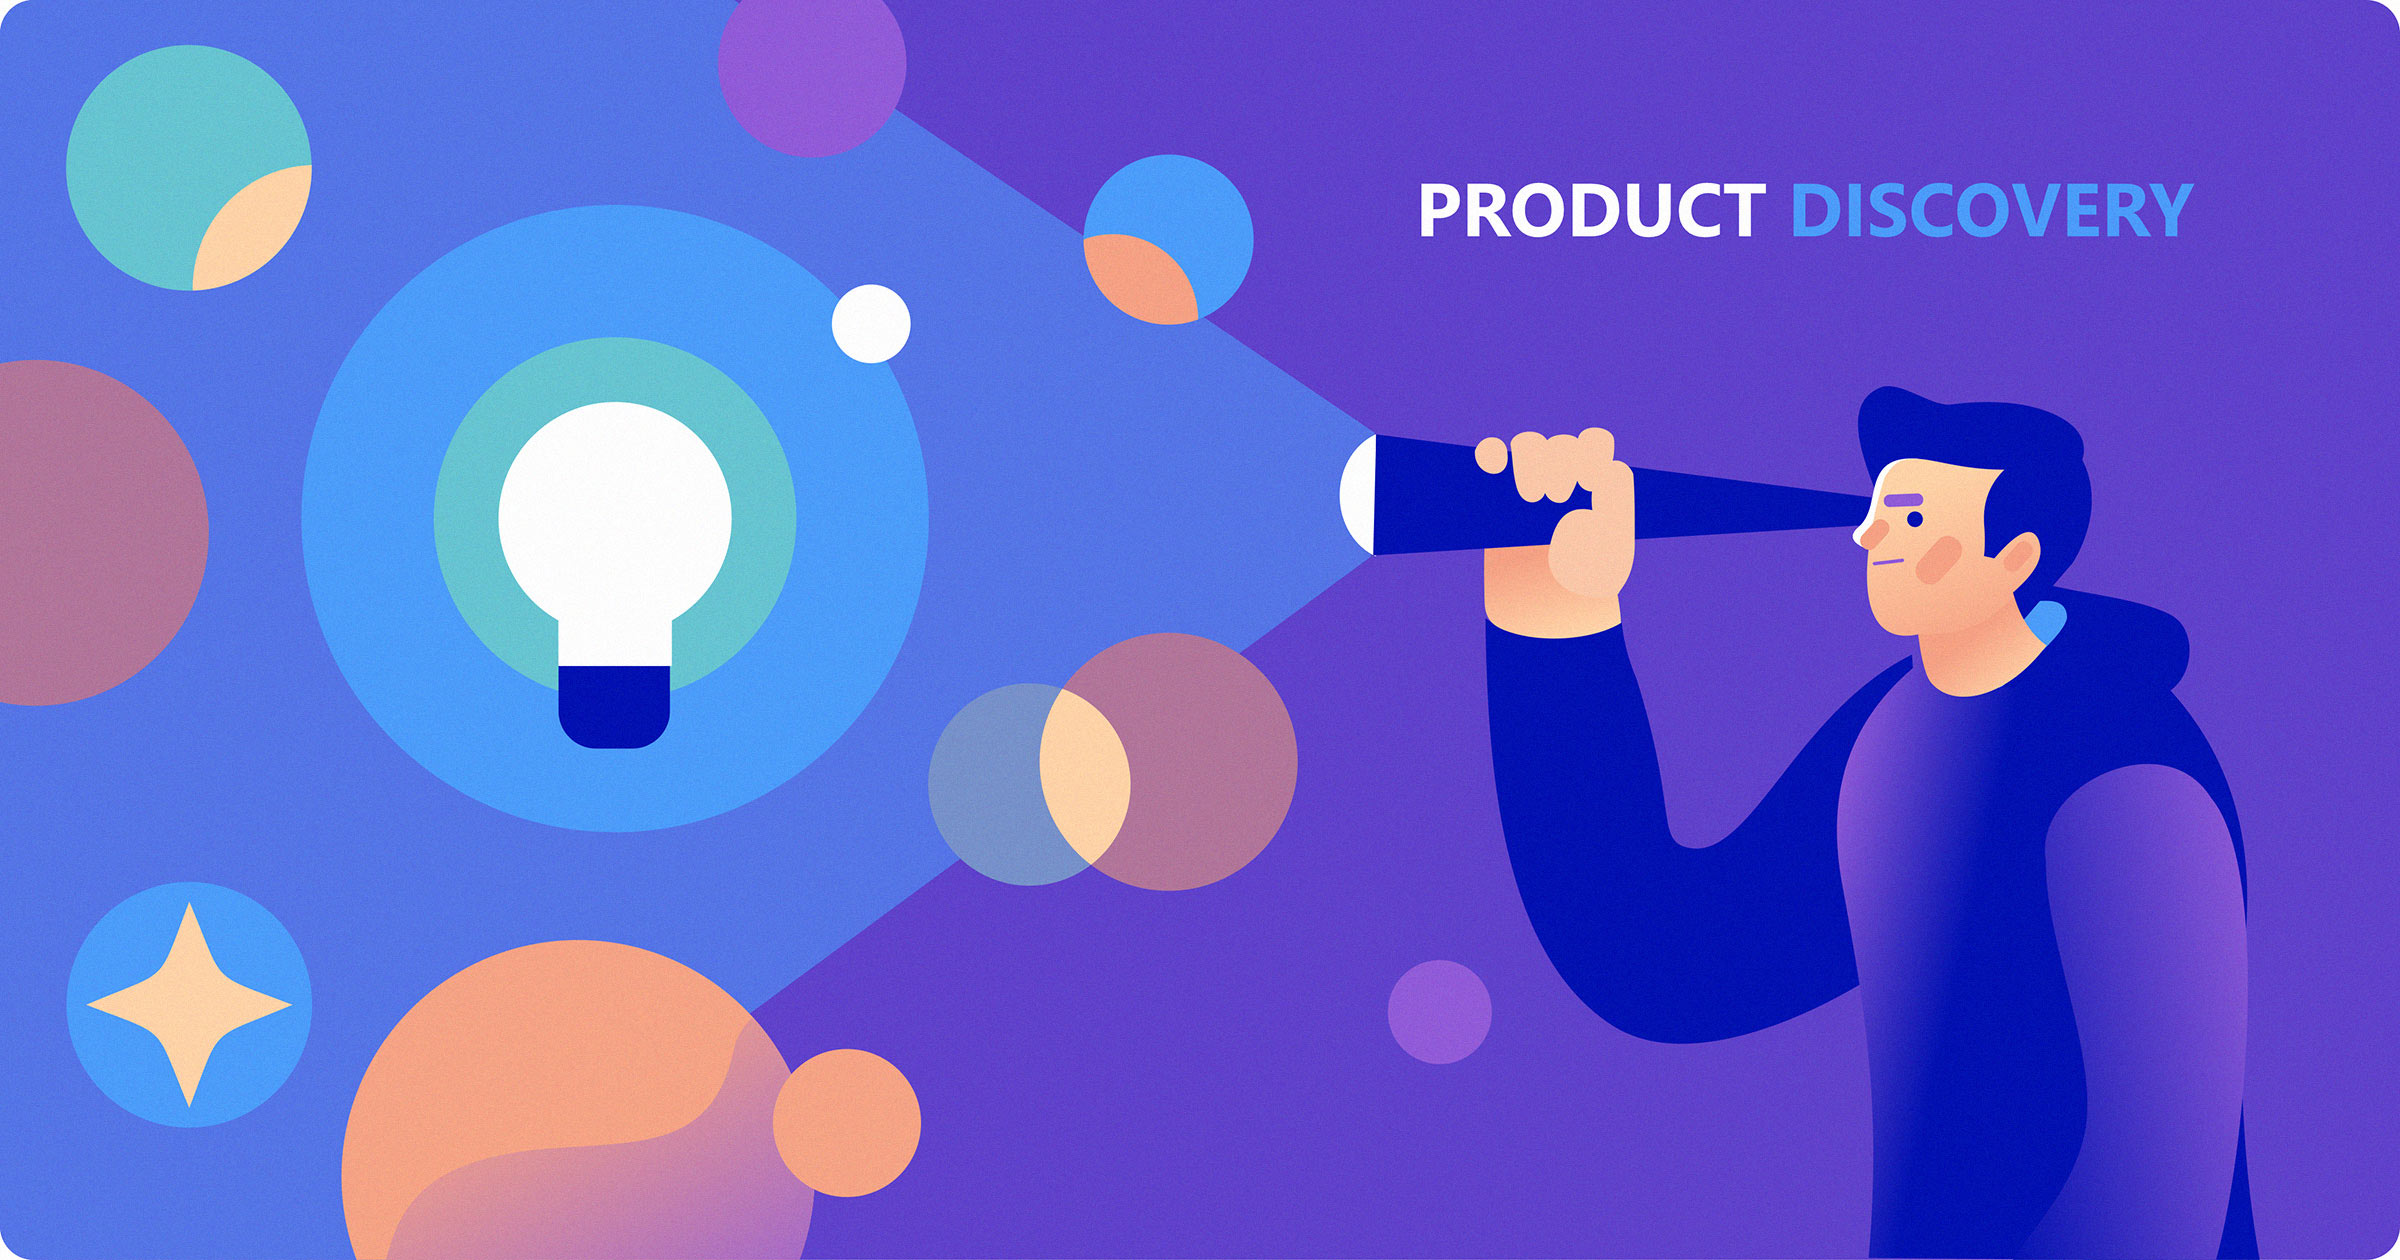 DOs and DON'Ts of Product Discovery